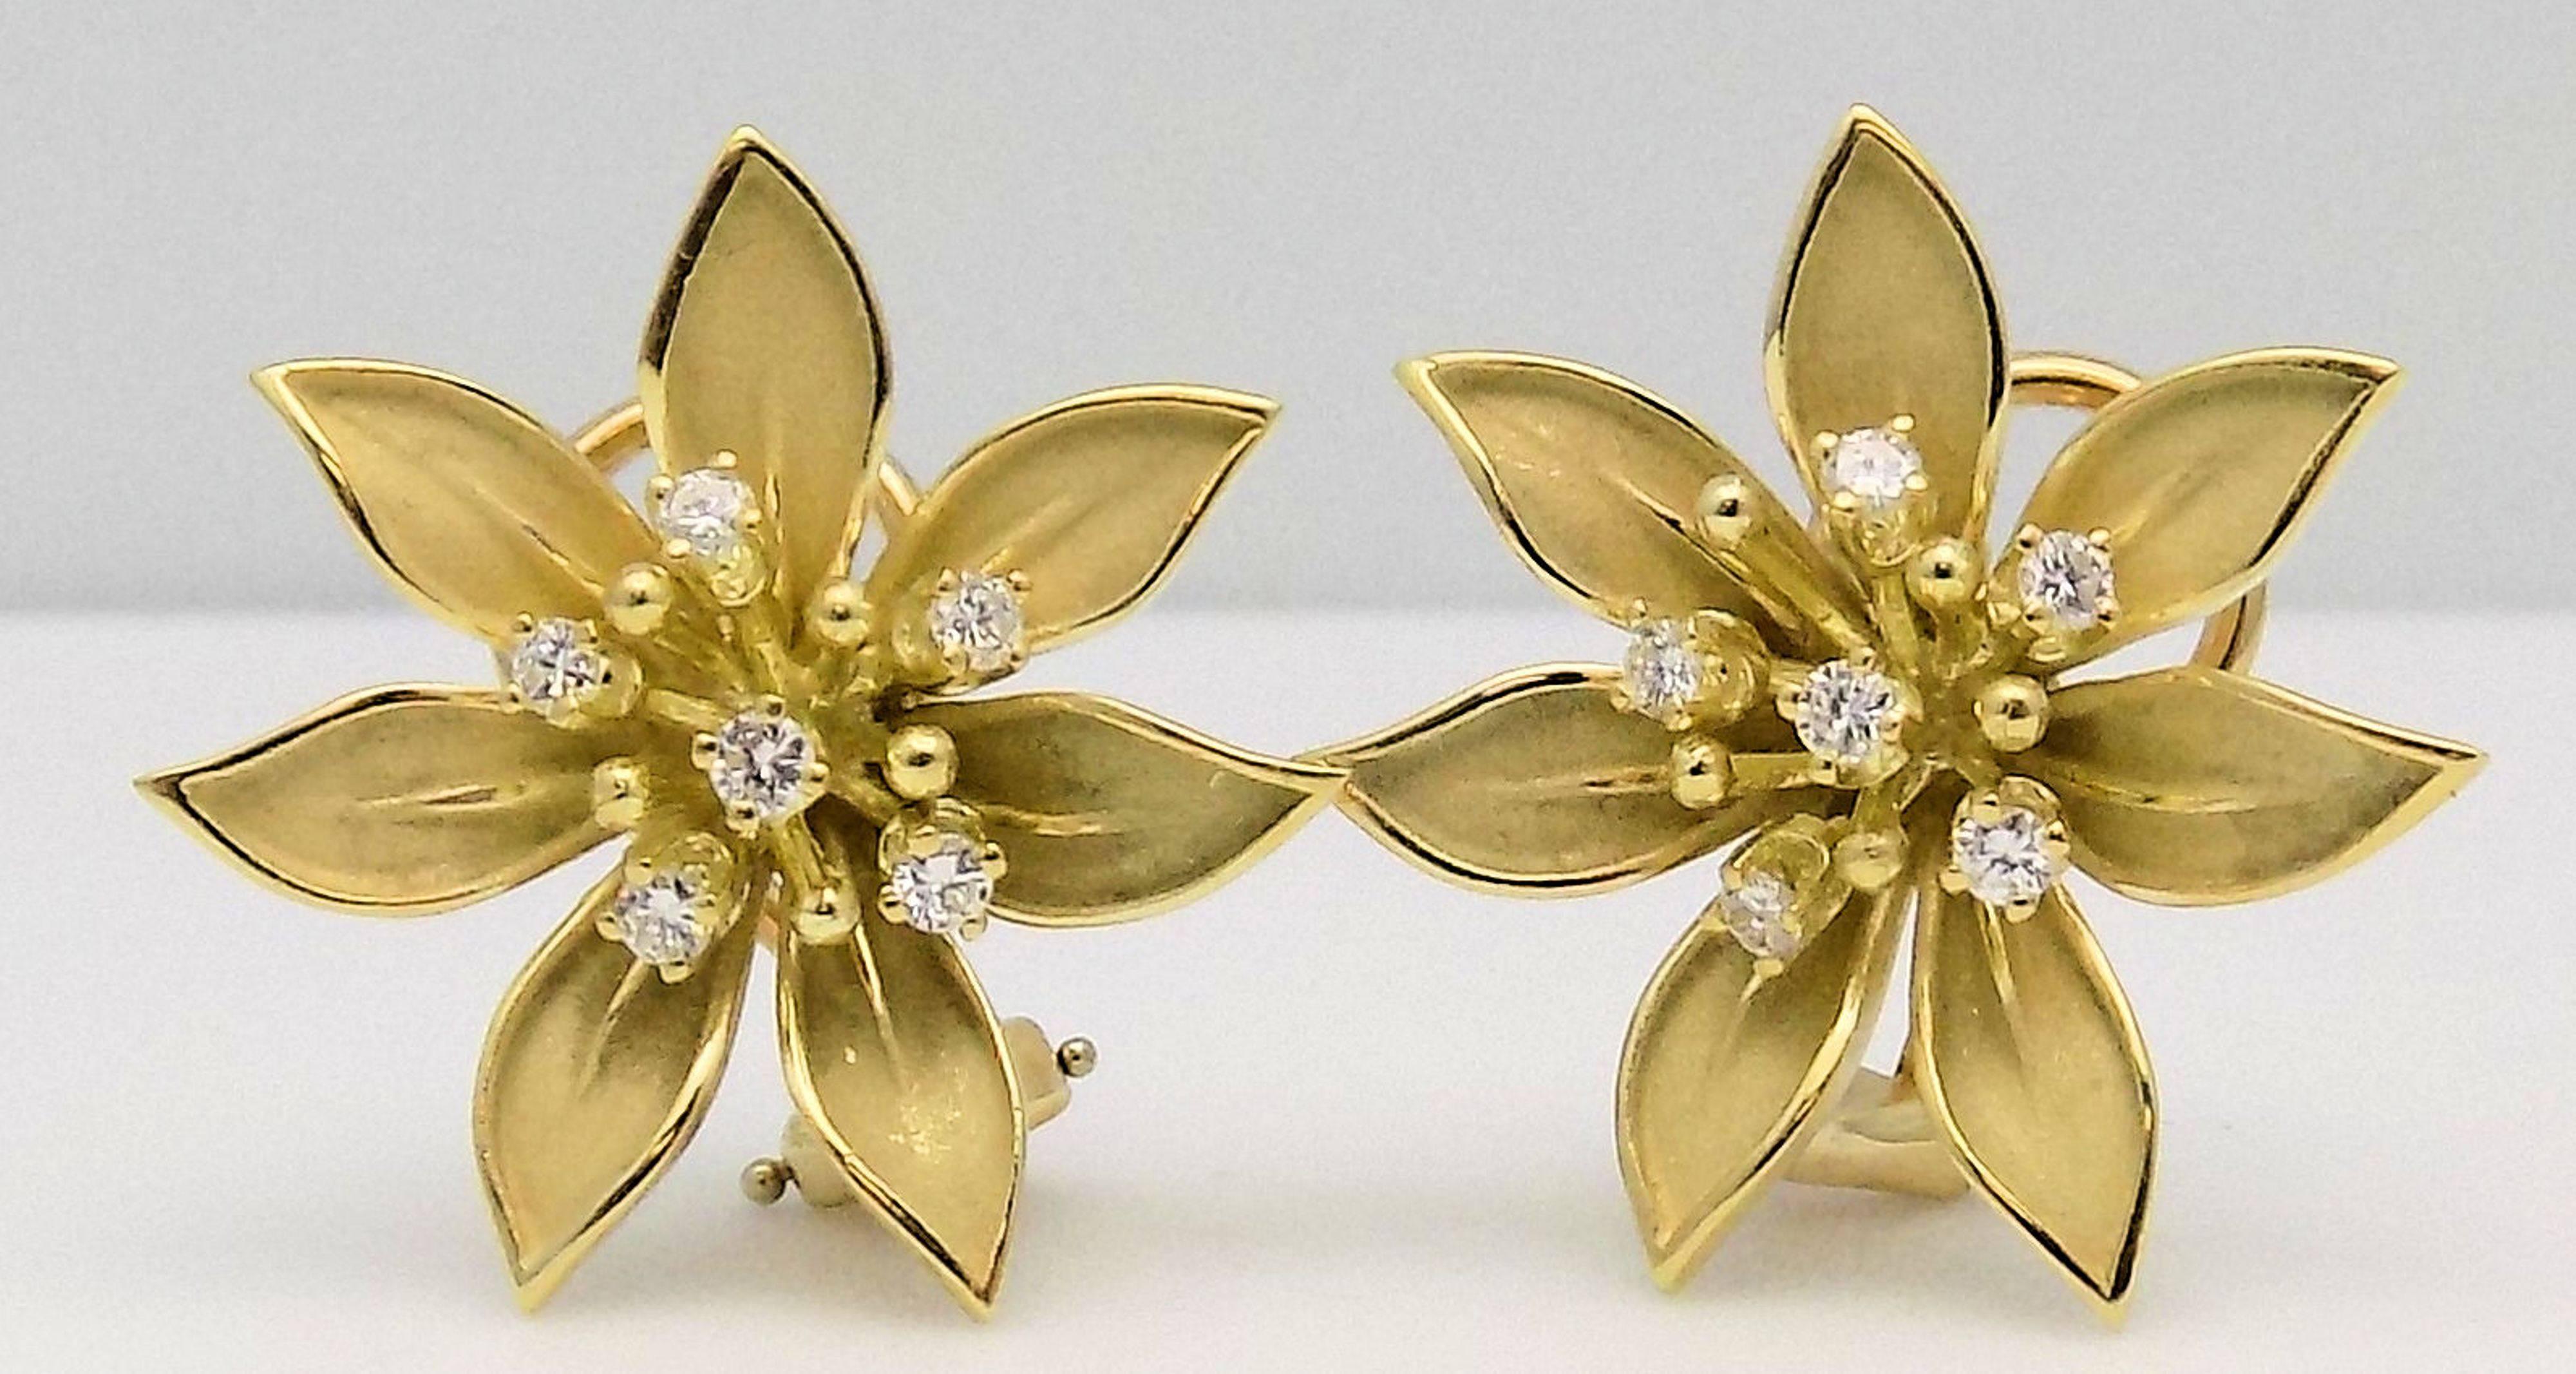 Dazzling 18 Karat Yellow Gold Flower Brooch & Earring Set with 19 Round Brilliant Diamonds 0.58 Carat Total Weight VS-2/SI-1, G-H. Signed: FR & 18K. 18.9 DWT or 29.39 Grams; Brooch measures 1.50